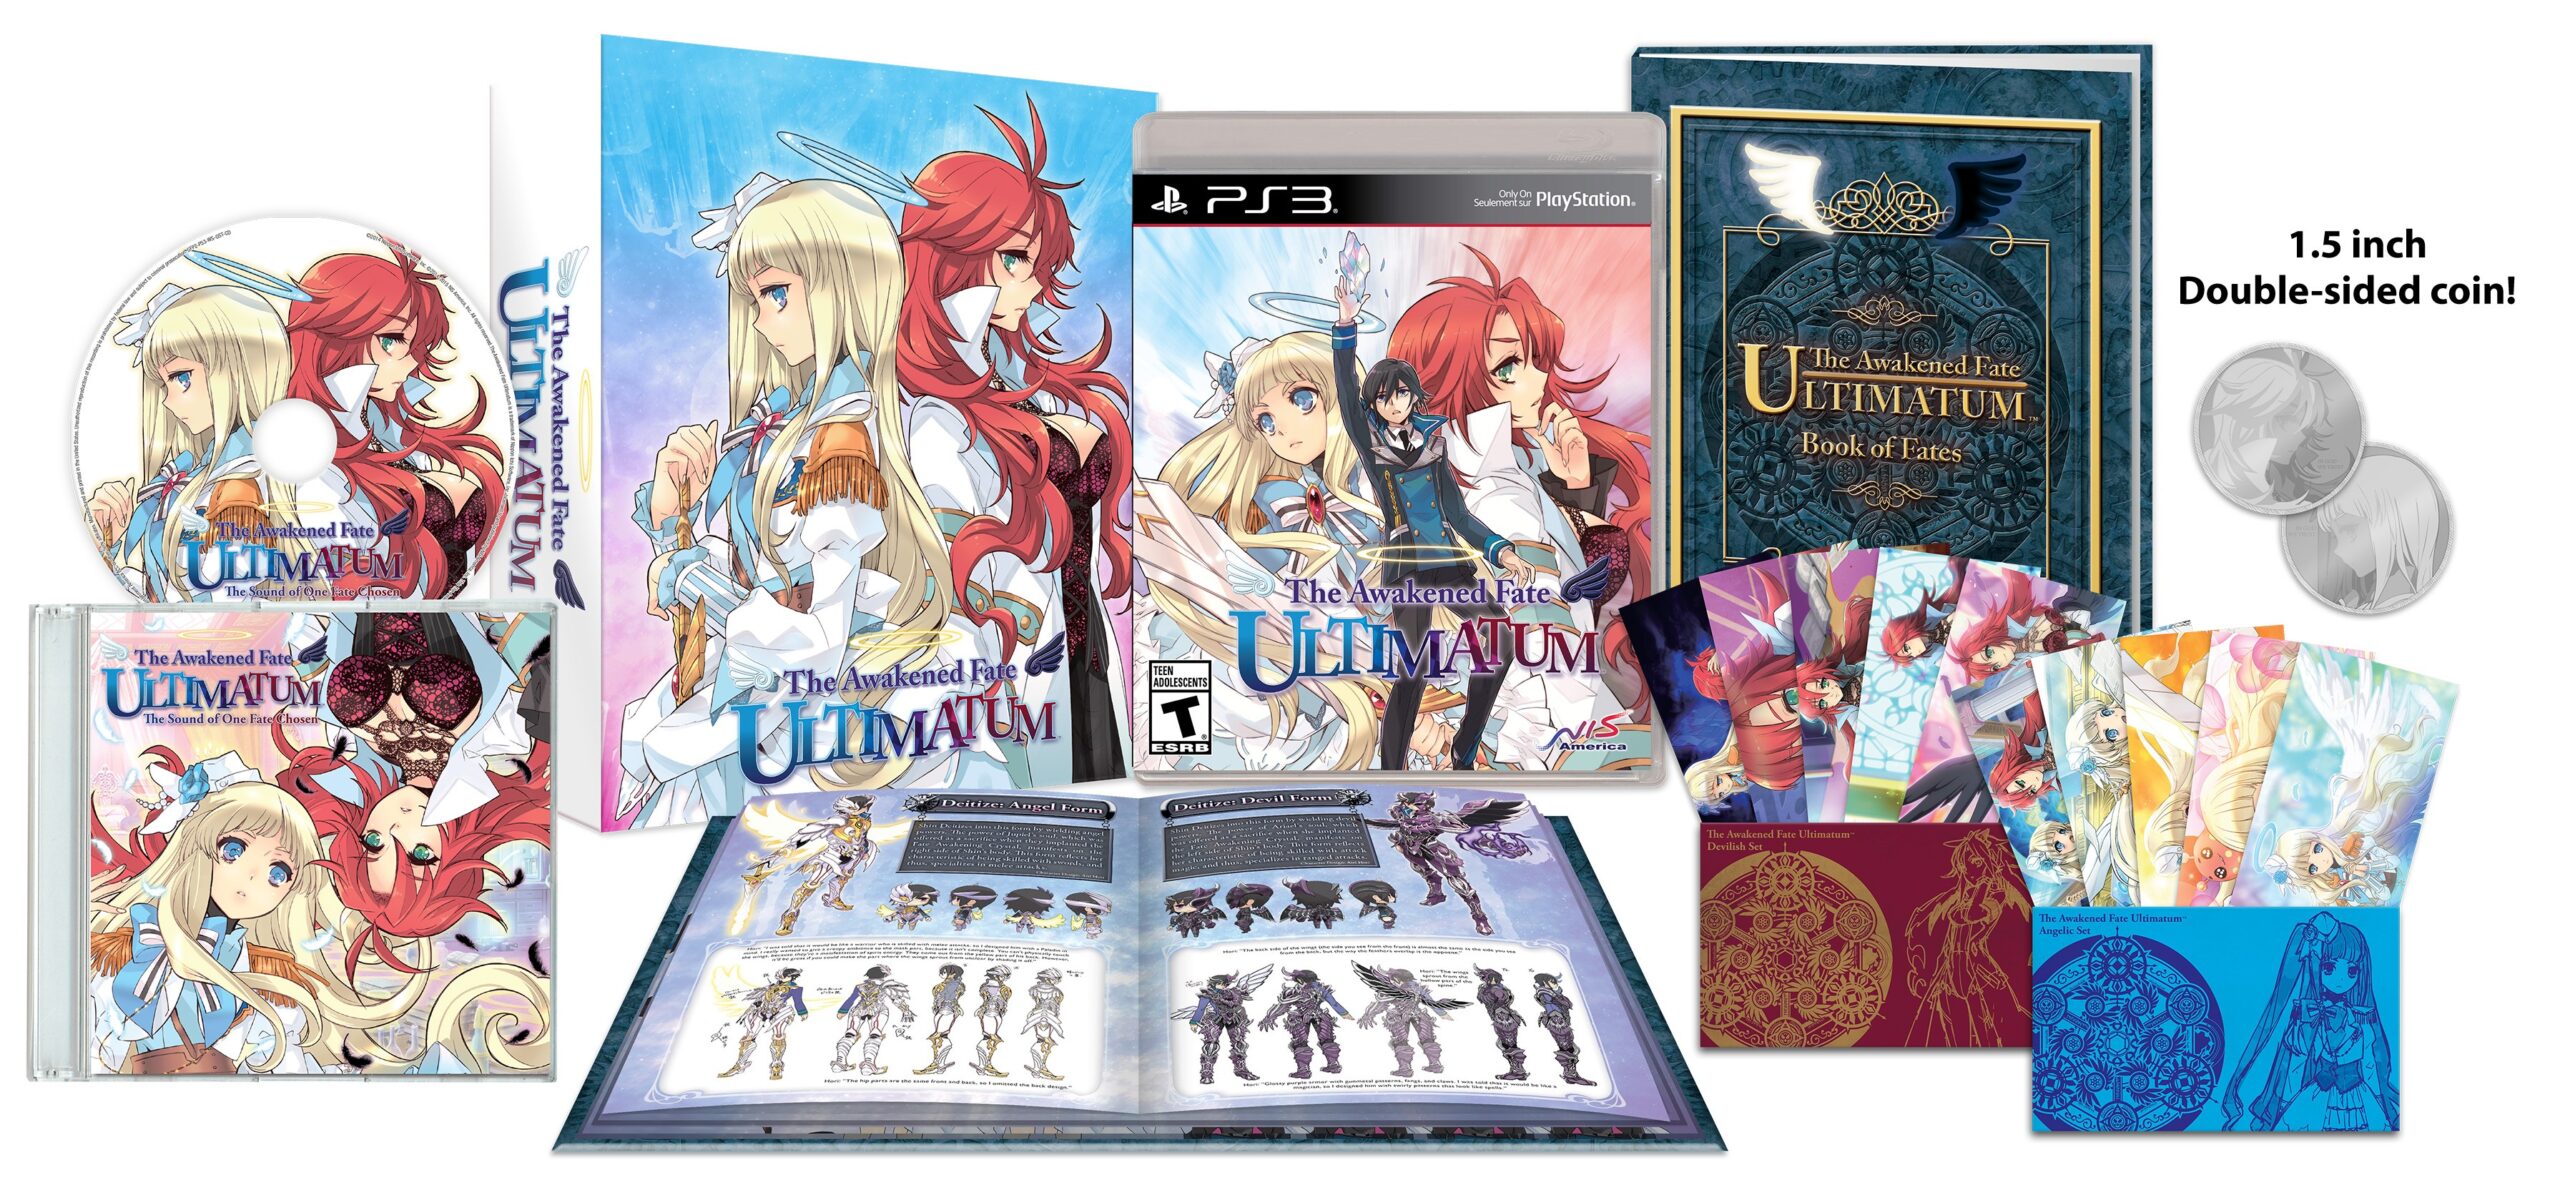 Awakened Fate Ultimatum Ultimate Fate Collectors Edition Boxset Includes Both PS3 Contents Artbook Soundtrack CD Jupiel Ariael Card Sets Fate Coin